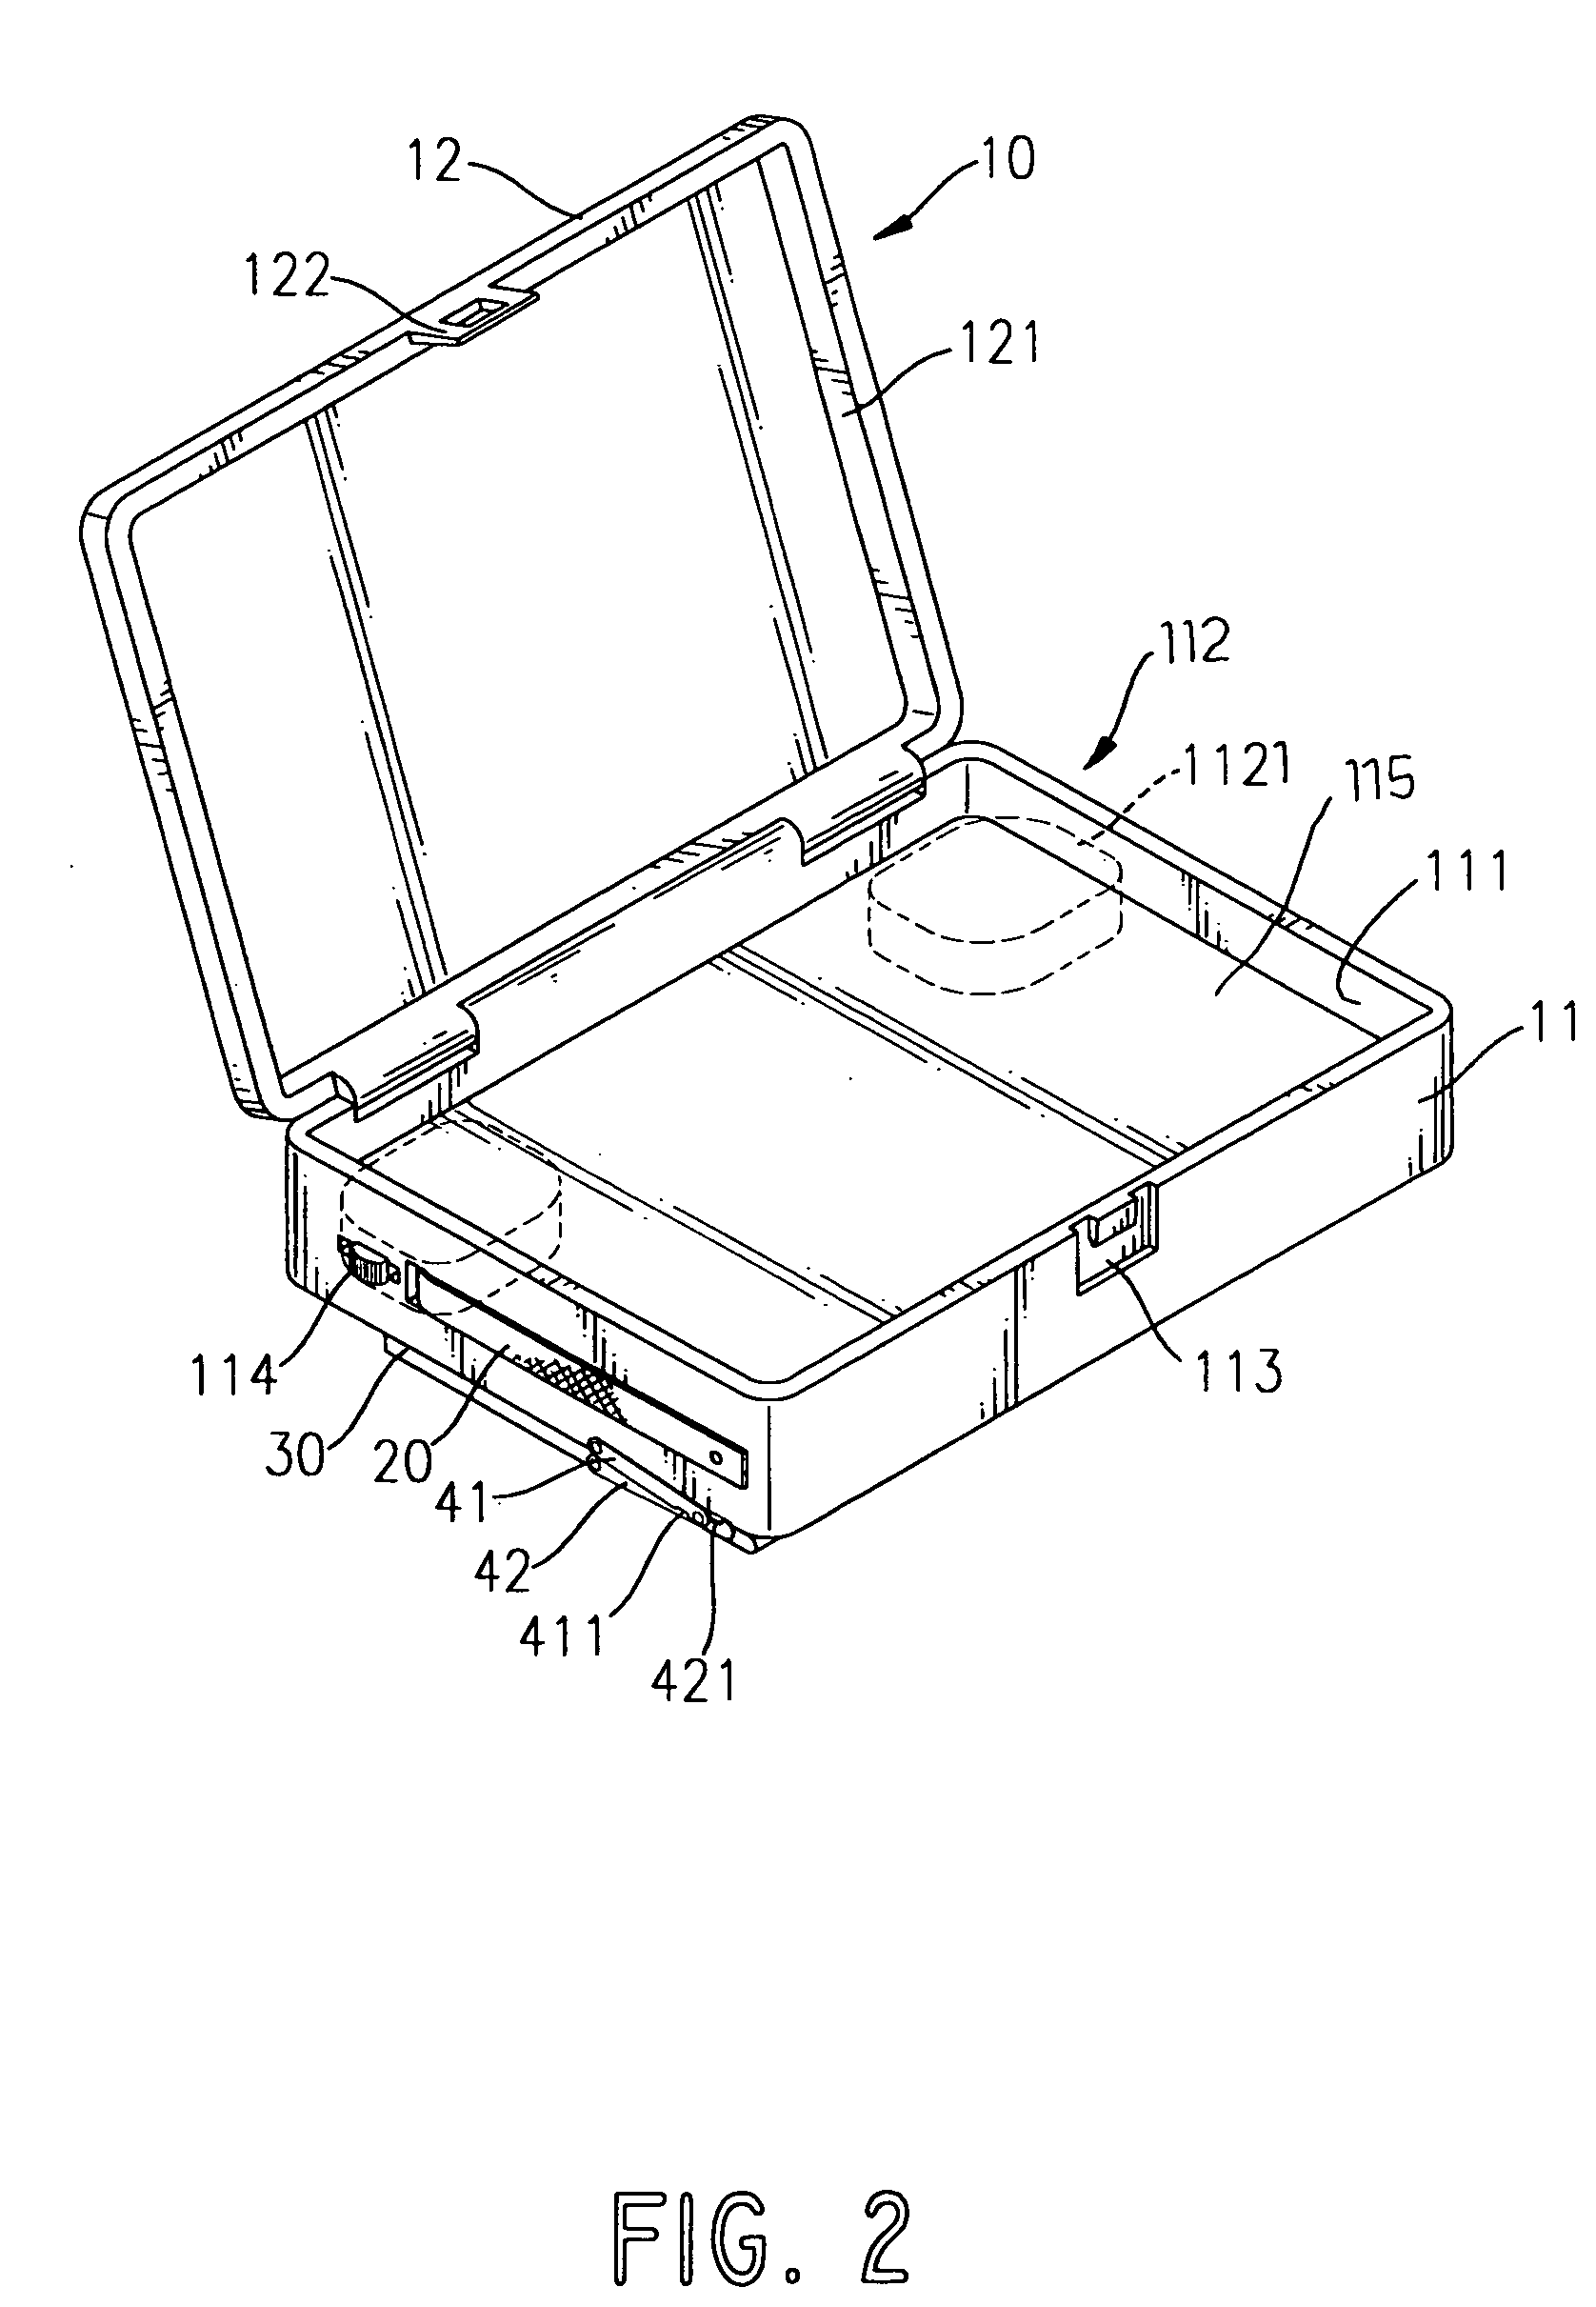 Notebook computer suitcase for a user using as a desk